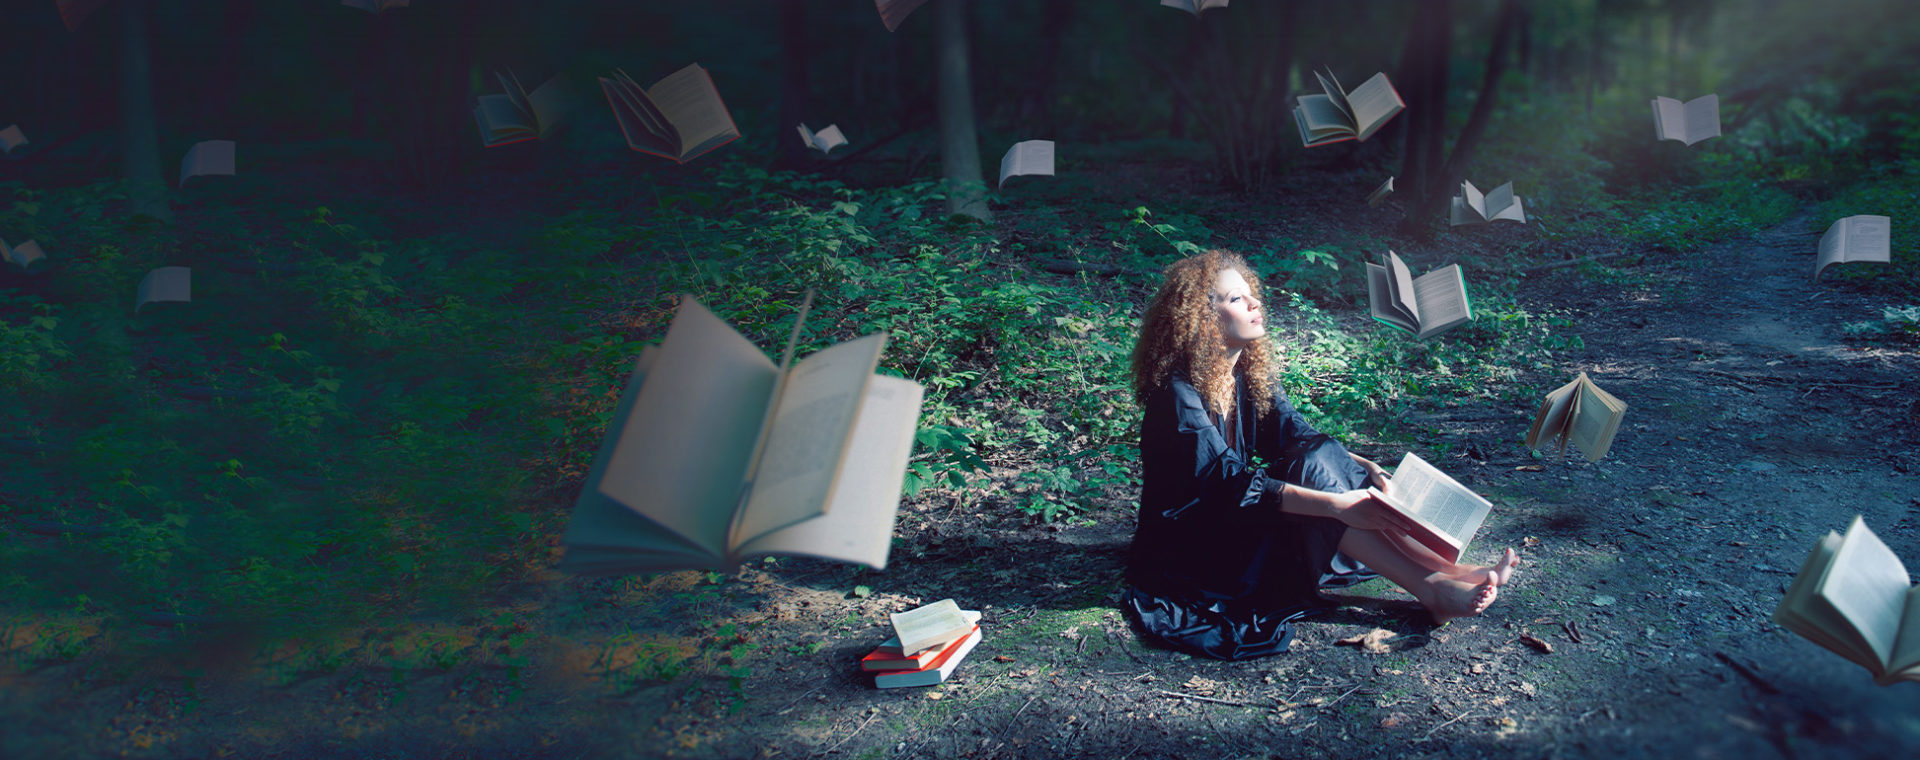 Picture of a woman sitting on a lawn with books flying around her.